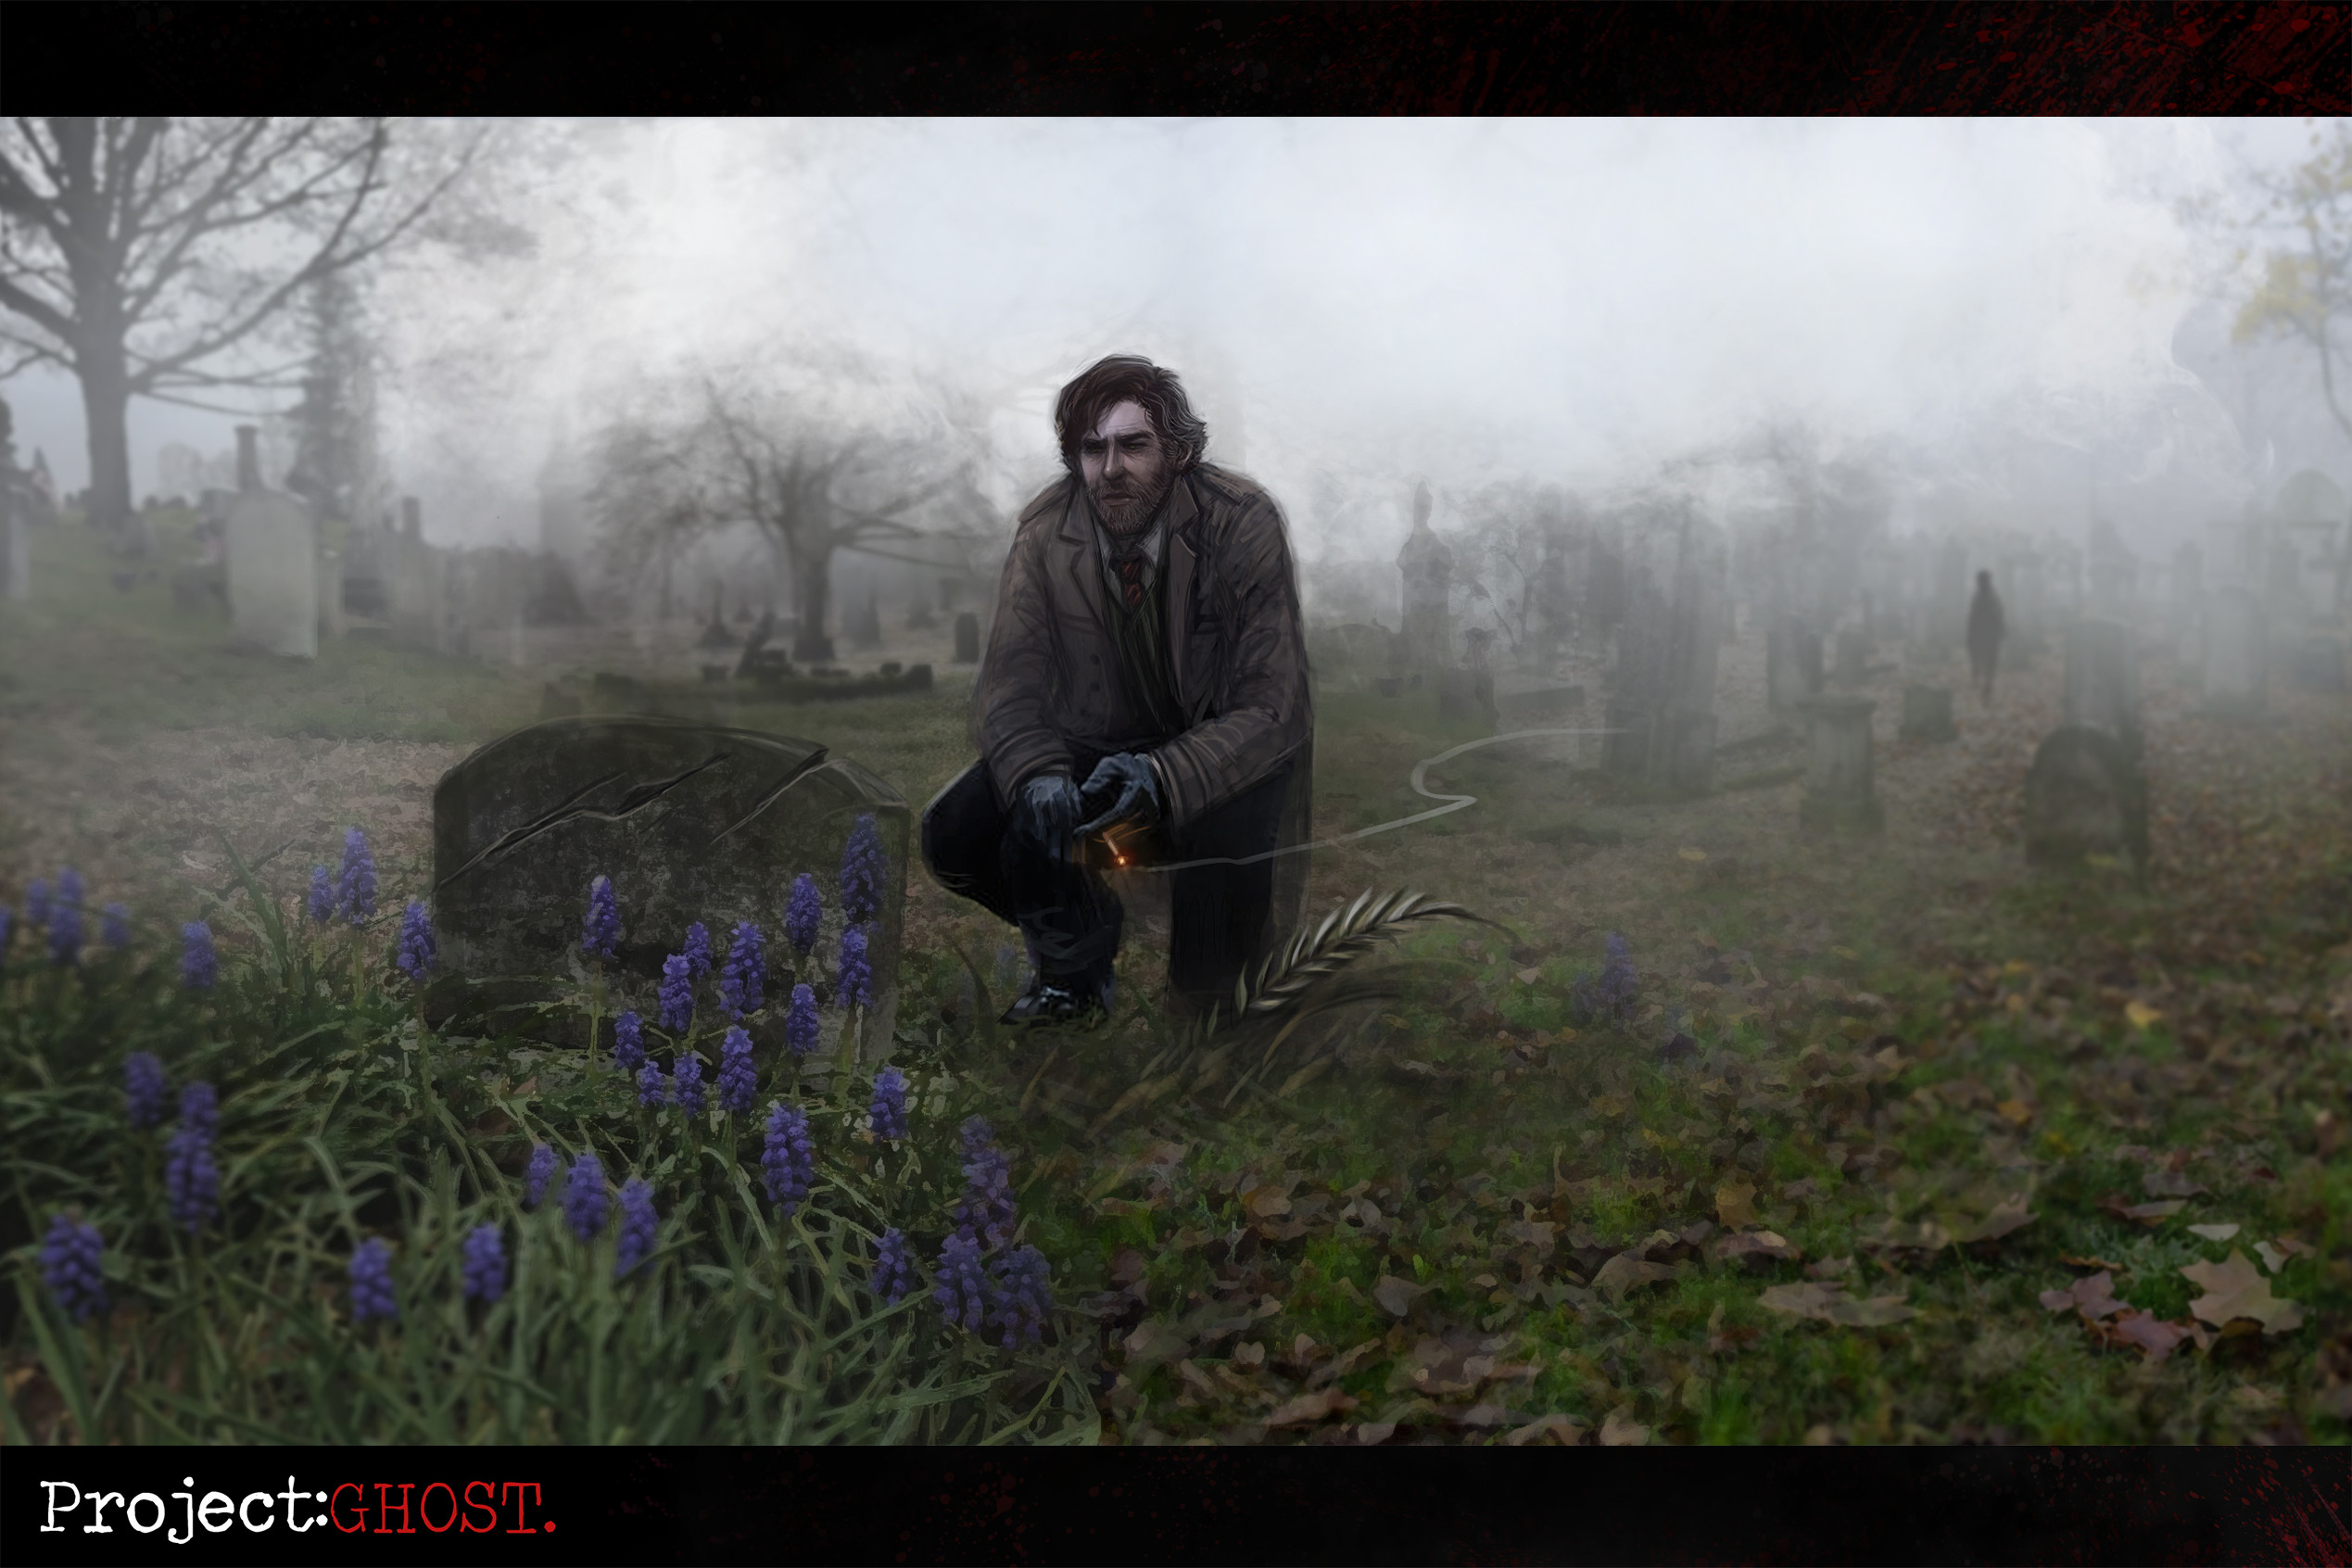 Thumbnail 3: 20 years later, Detective Peter Roberts visits Flynn's grave to find it desecrated, searching for clues that lead towards his demise. 